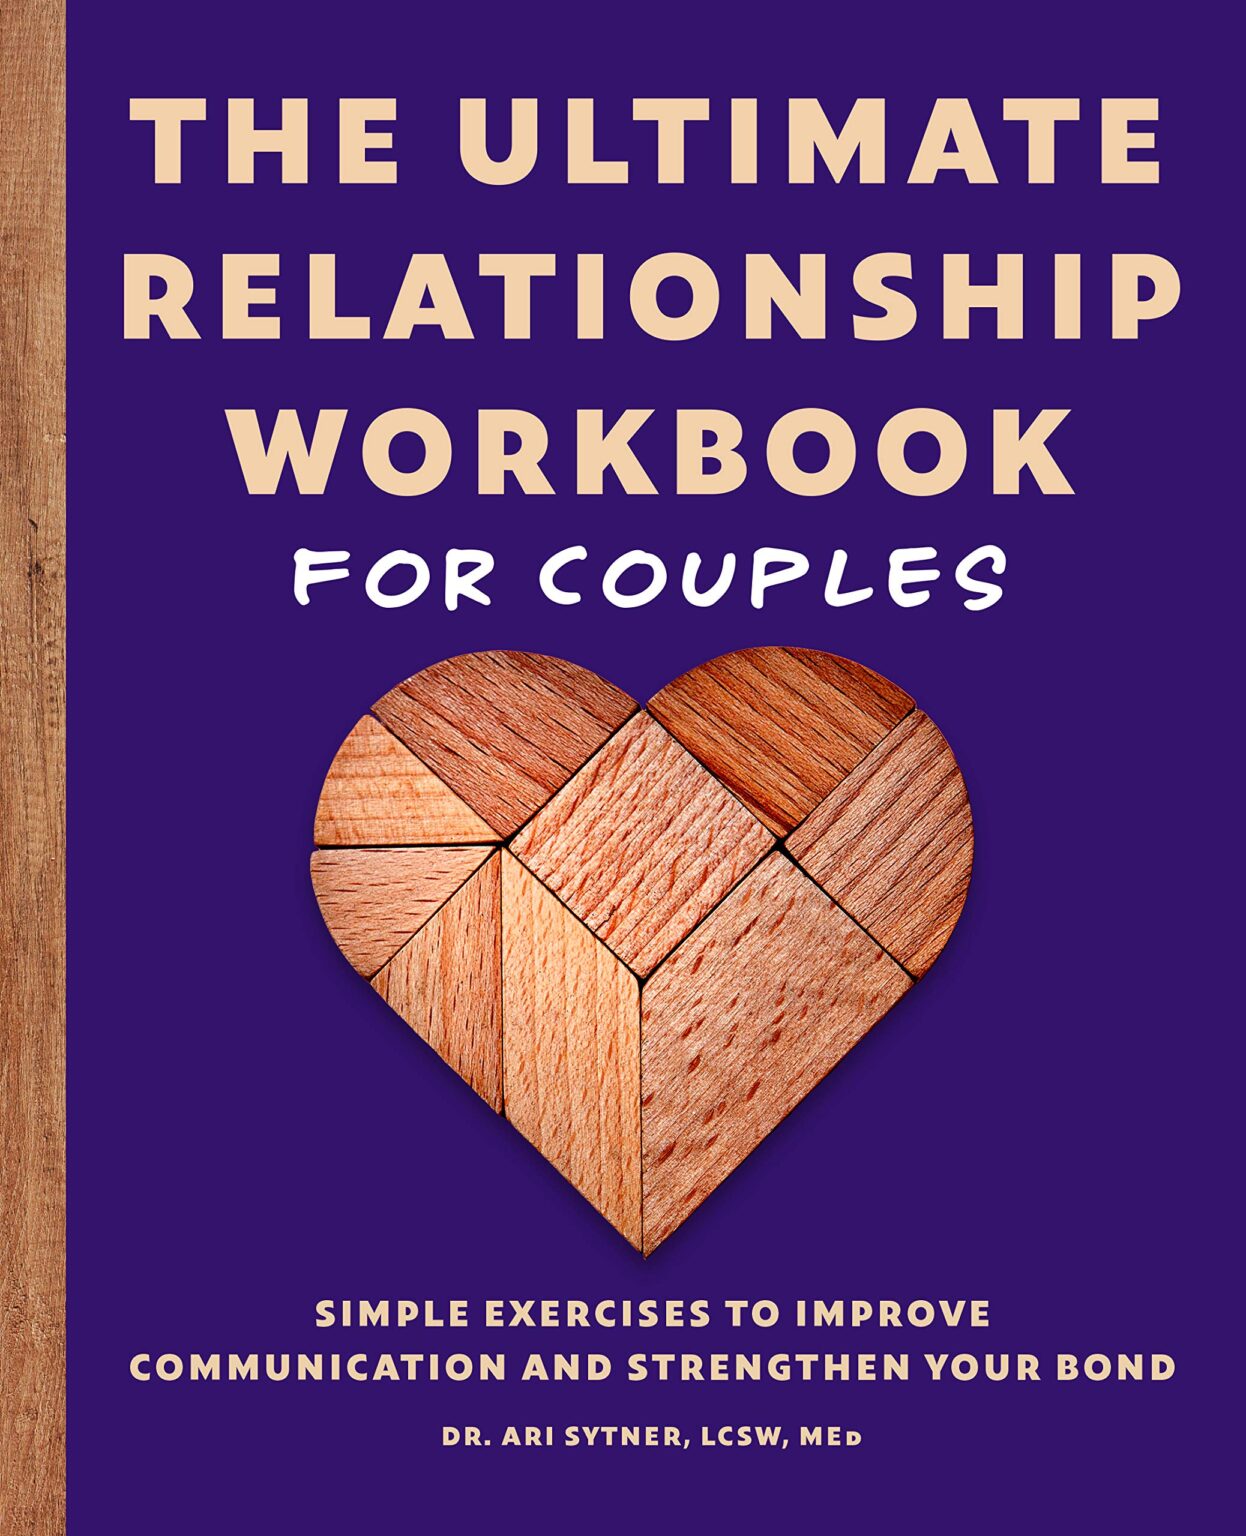 MARRIAGE WORKBOOK ULTIMATE RELATIONSHIP BOOK 1246x1536 